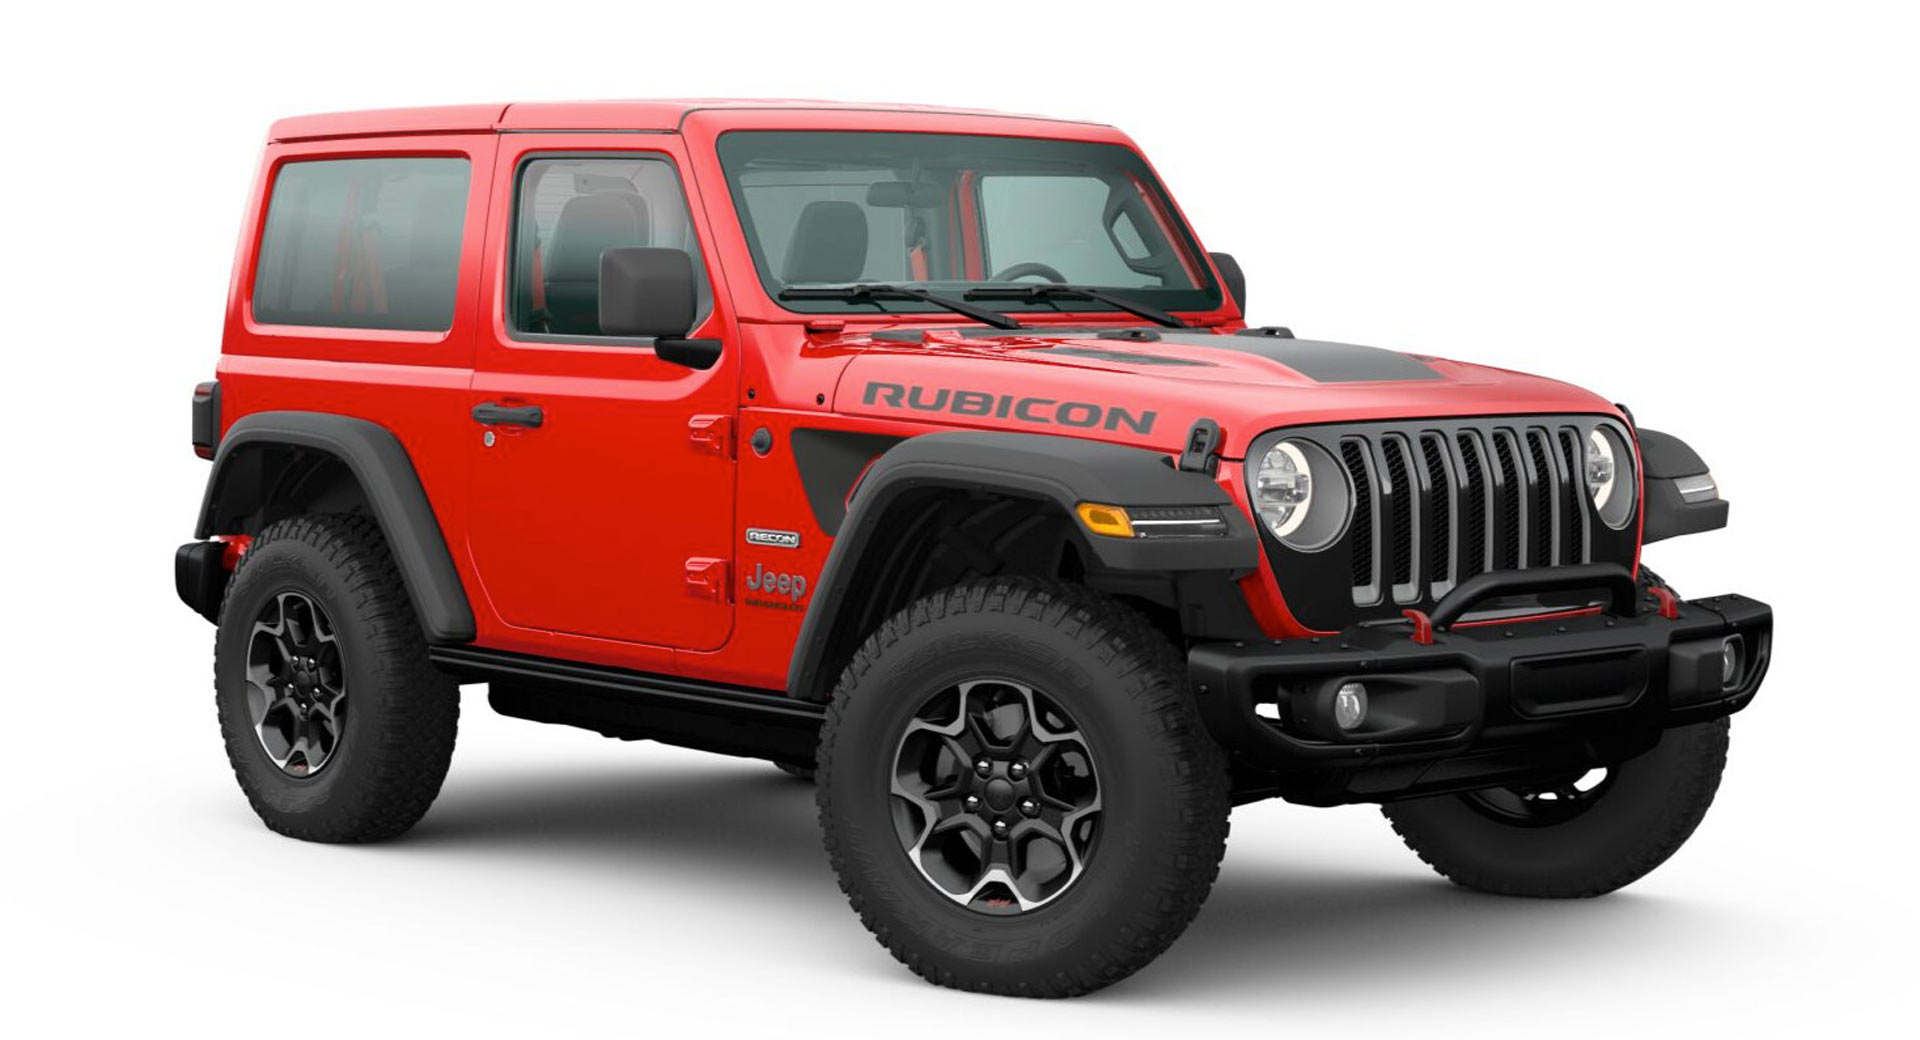 2020 Jeep Wrangler Rubicon 'Recon' Is All About Off-Roading | Carscoops